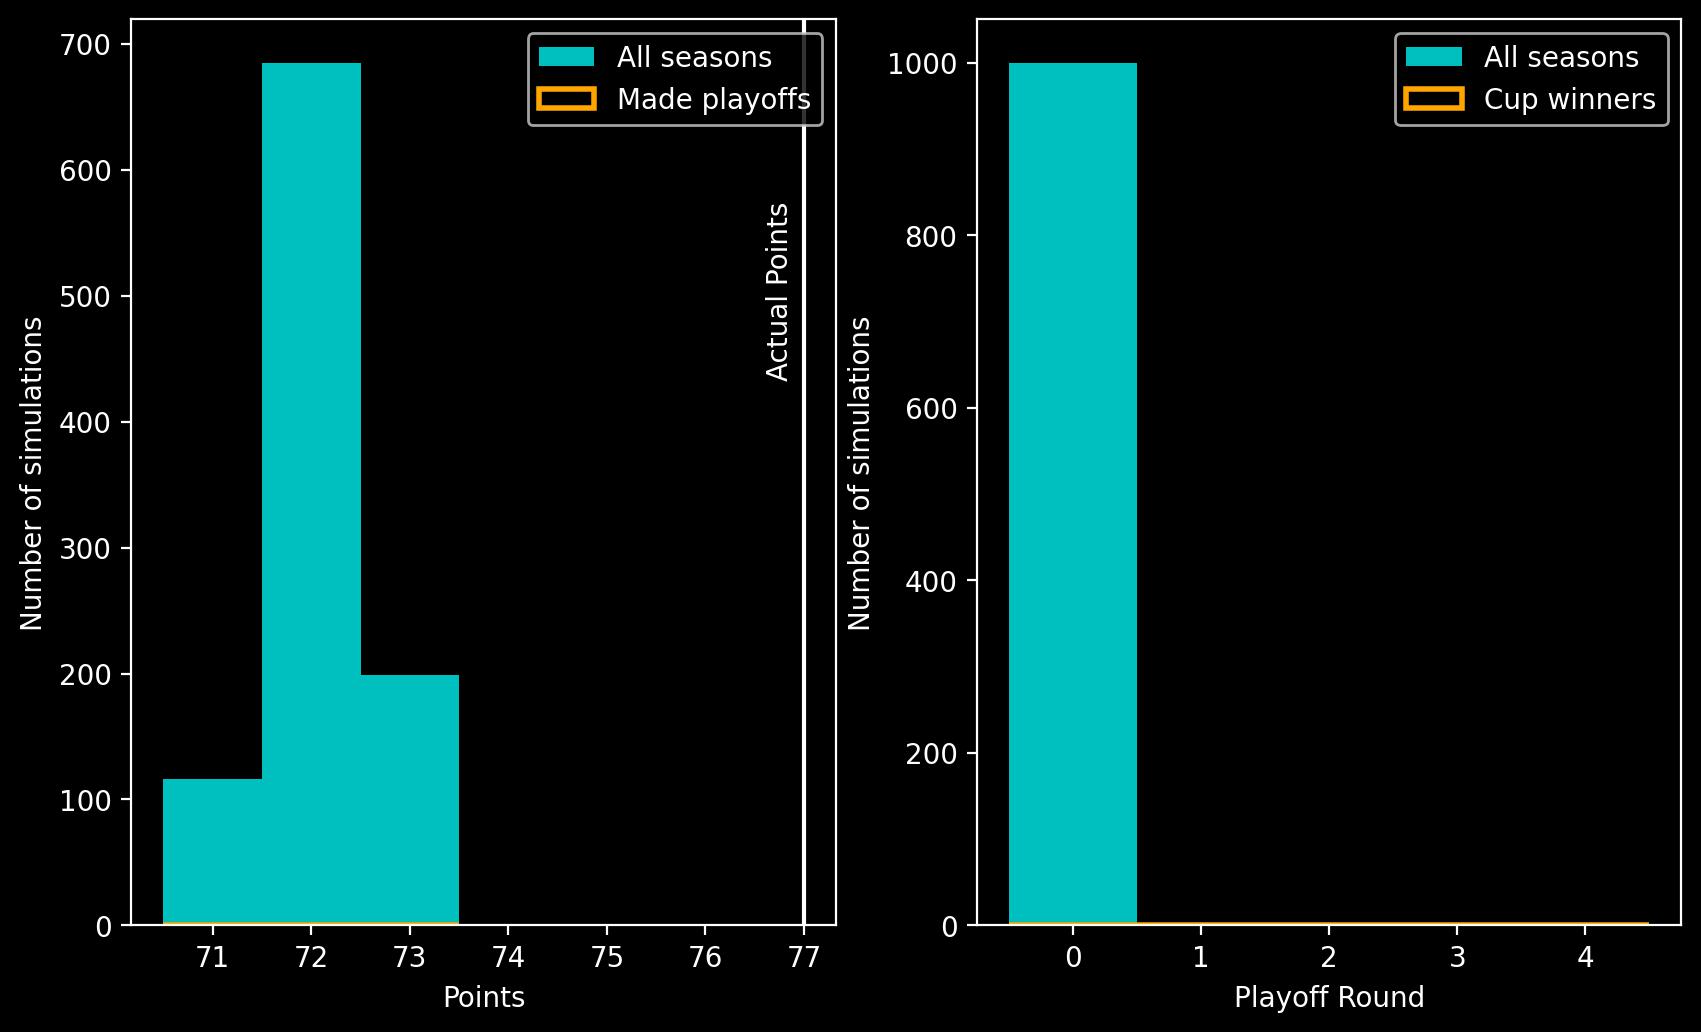 Two panel plot showing histograms. Left panel shows a histogram of points on the x-axis against number of simulations on the y-axis, the peak is at 72 points. Right panel shows playoff round on the x-axis against number of simulations on the y-axis. The largest bar is at playoff round 0.